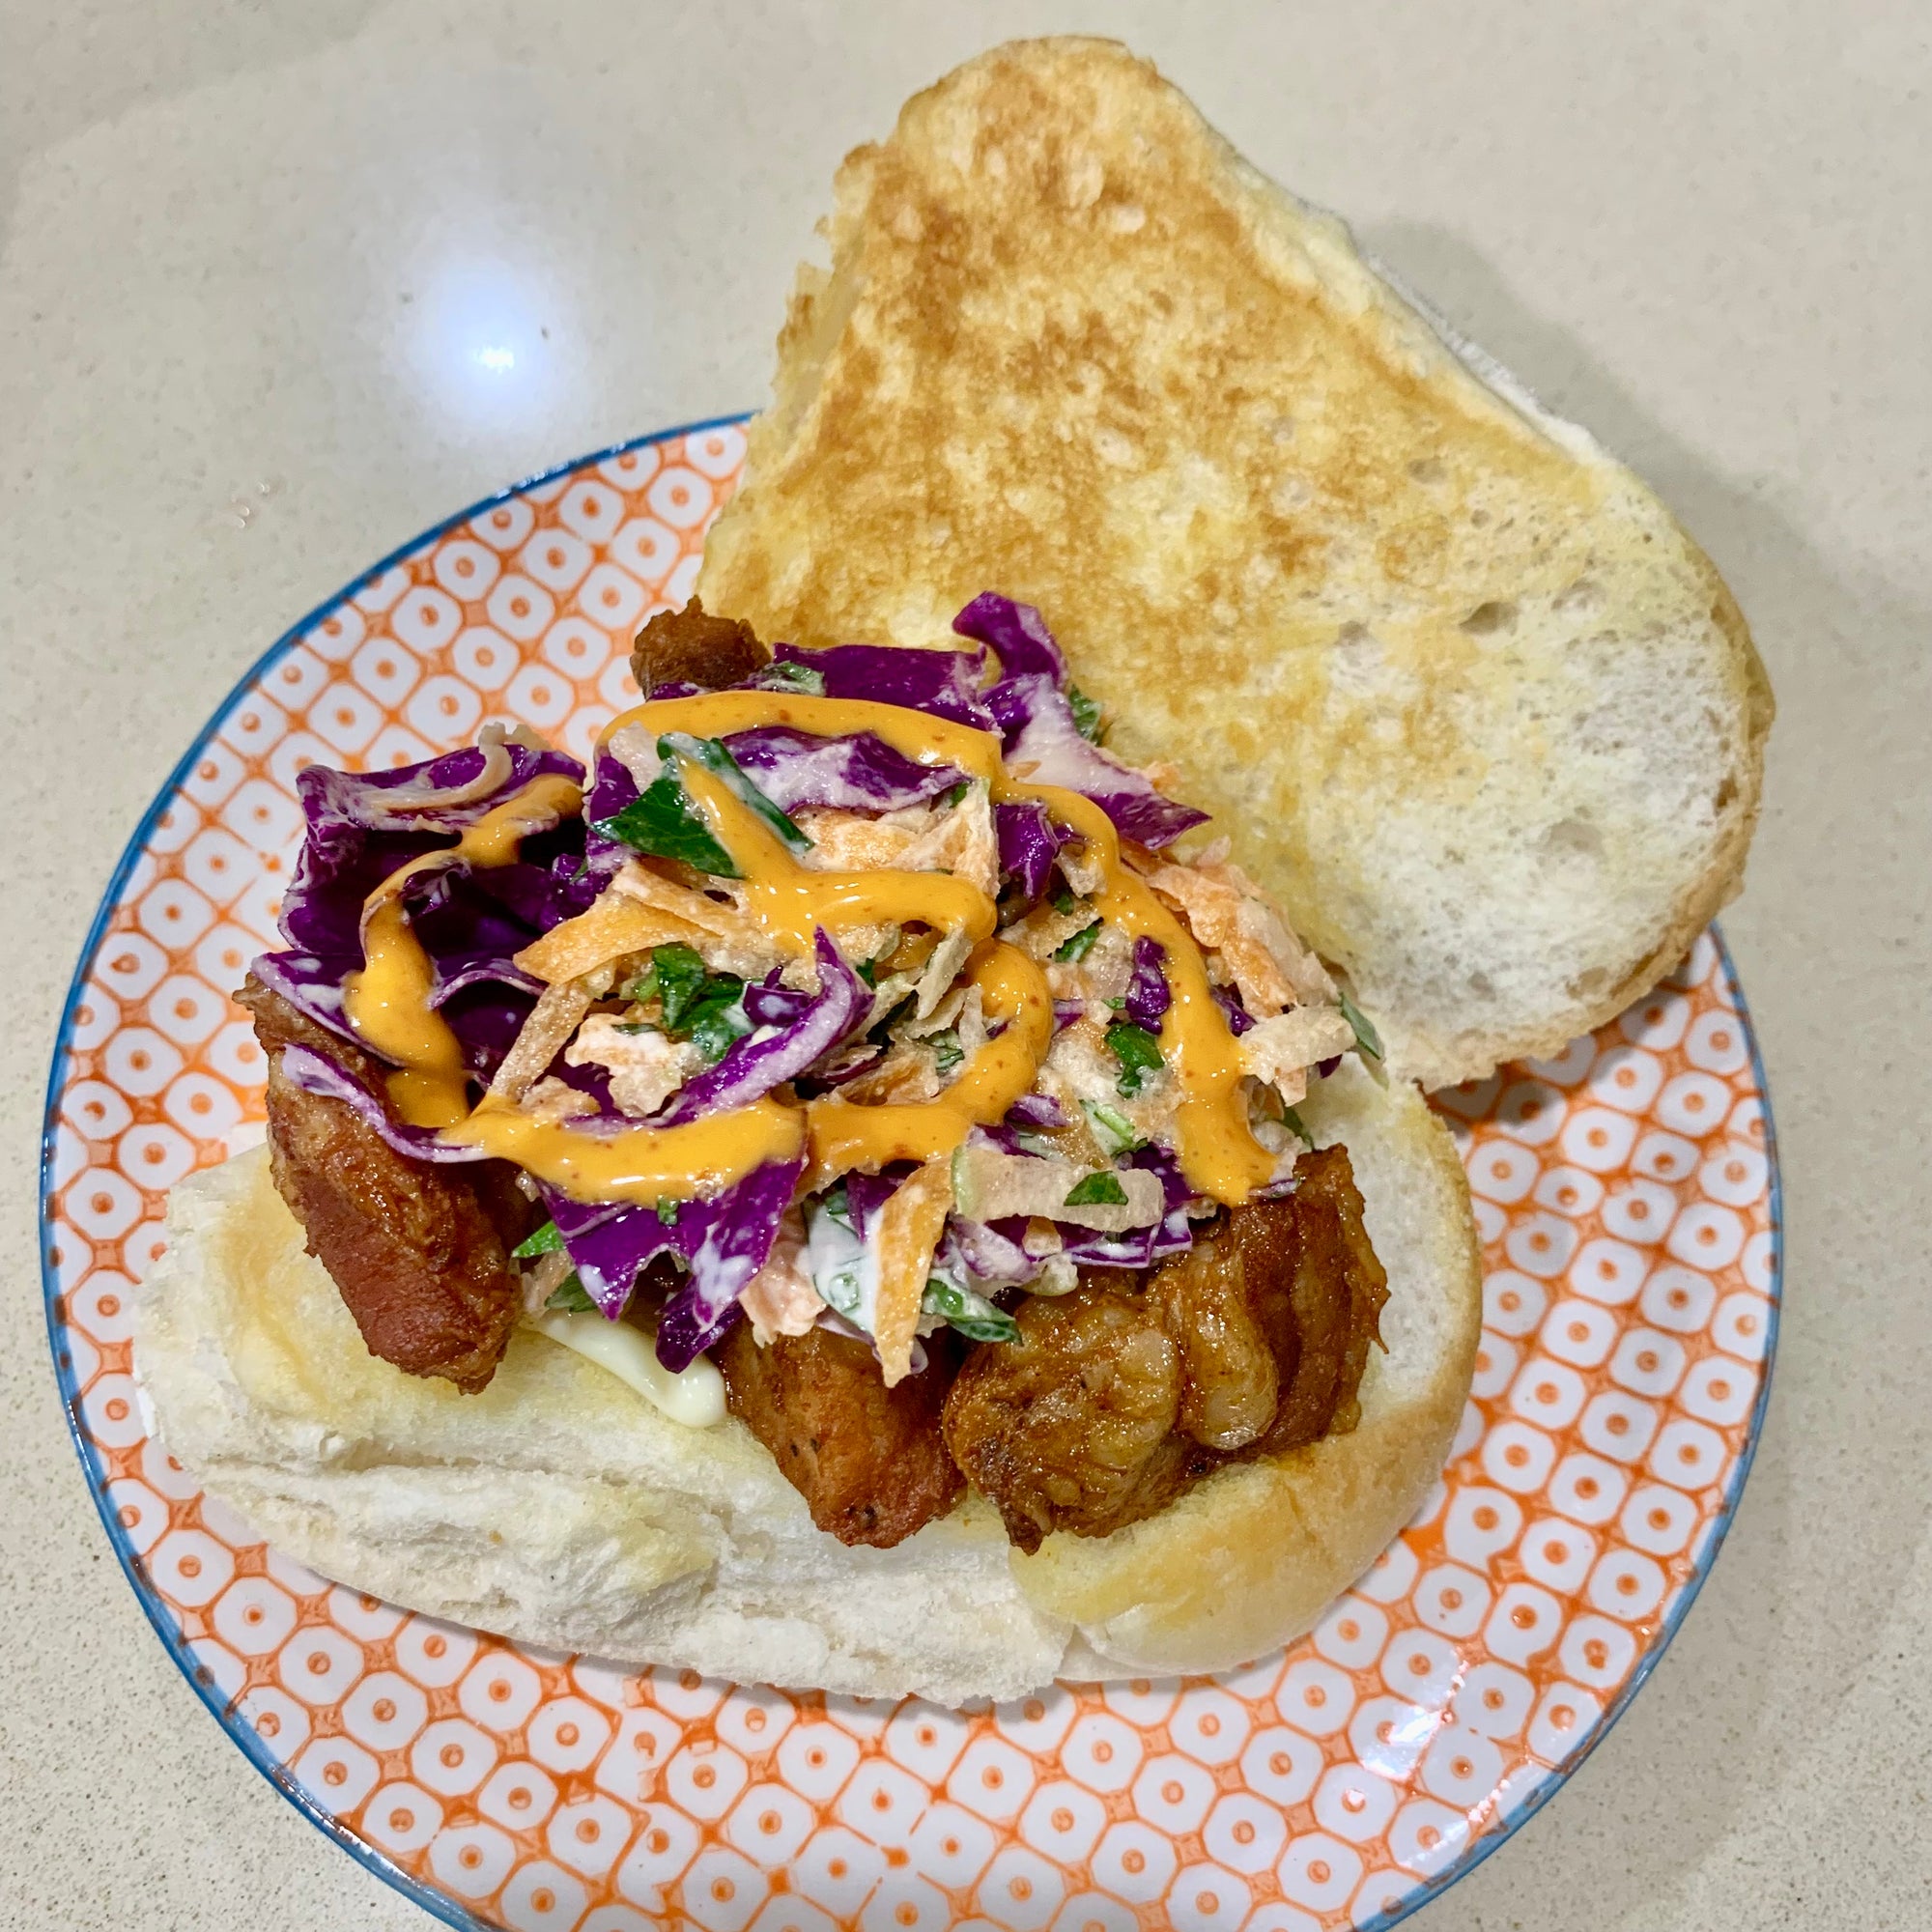 15 minute Pork Belly Burgers with Apple Slaw